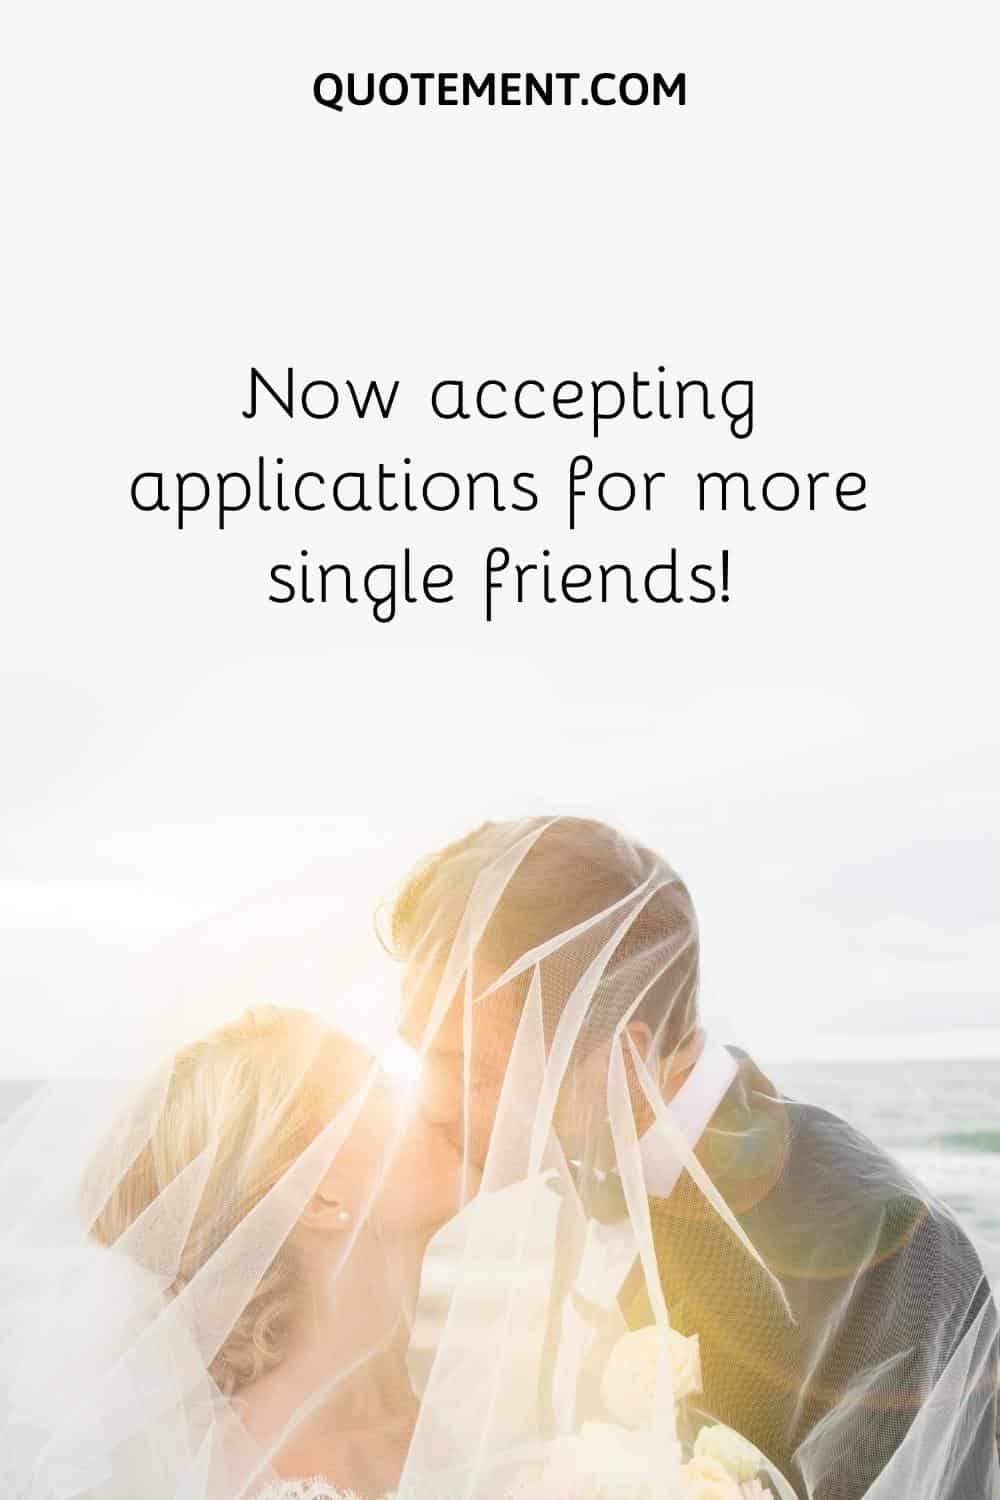 Now accepting applications for more single friends!